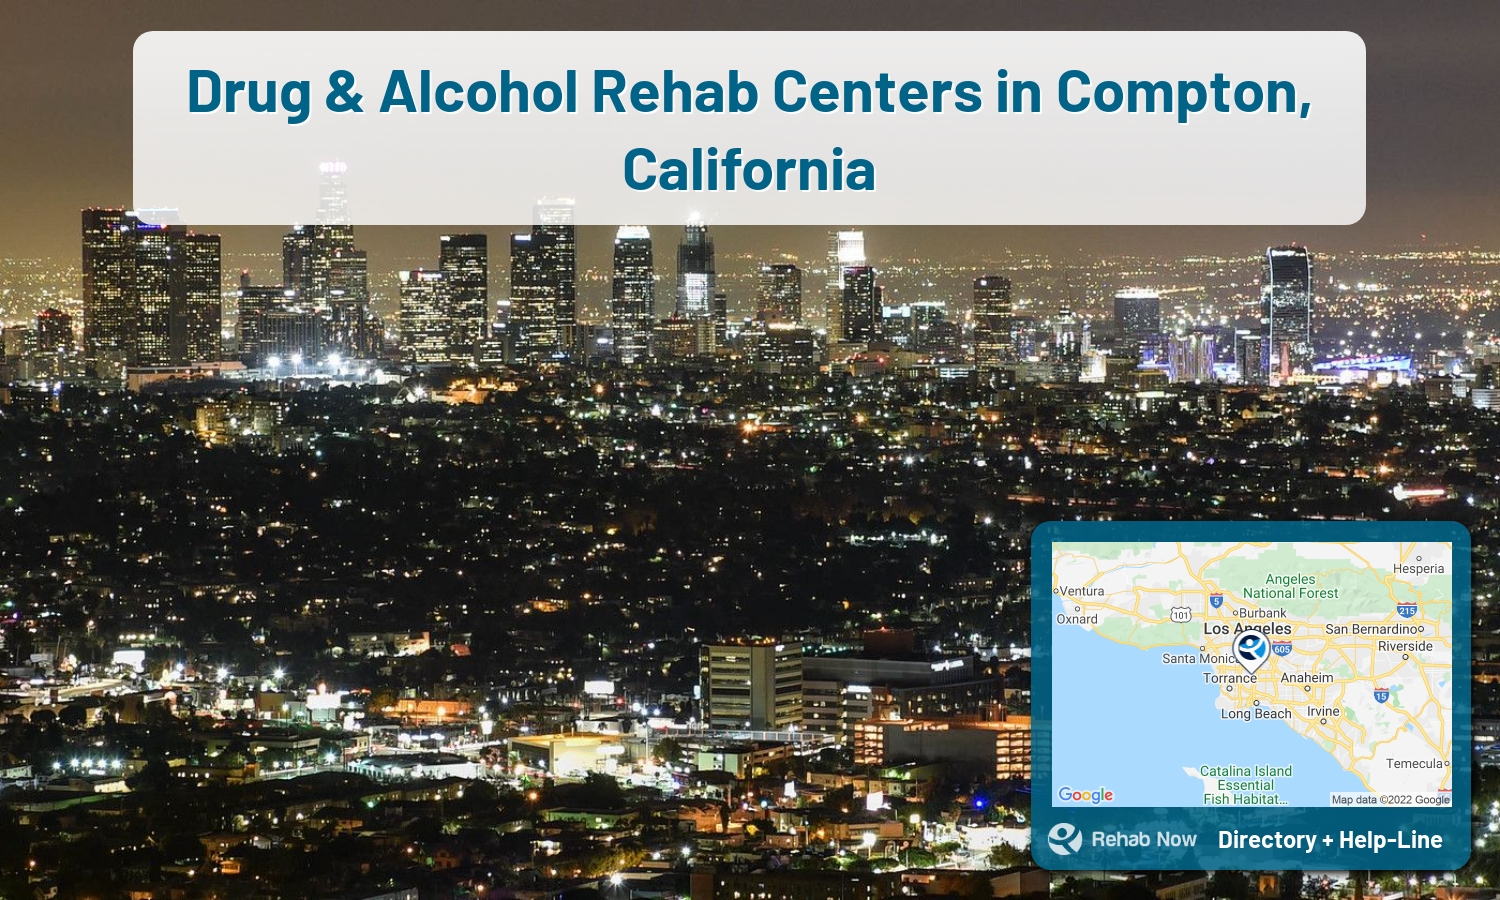 Compton, CA Treatment Centers. Find drug rehab in Compton, California, or detox and treatment programs. Get the right help now!